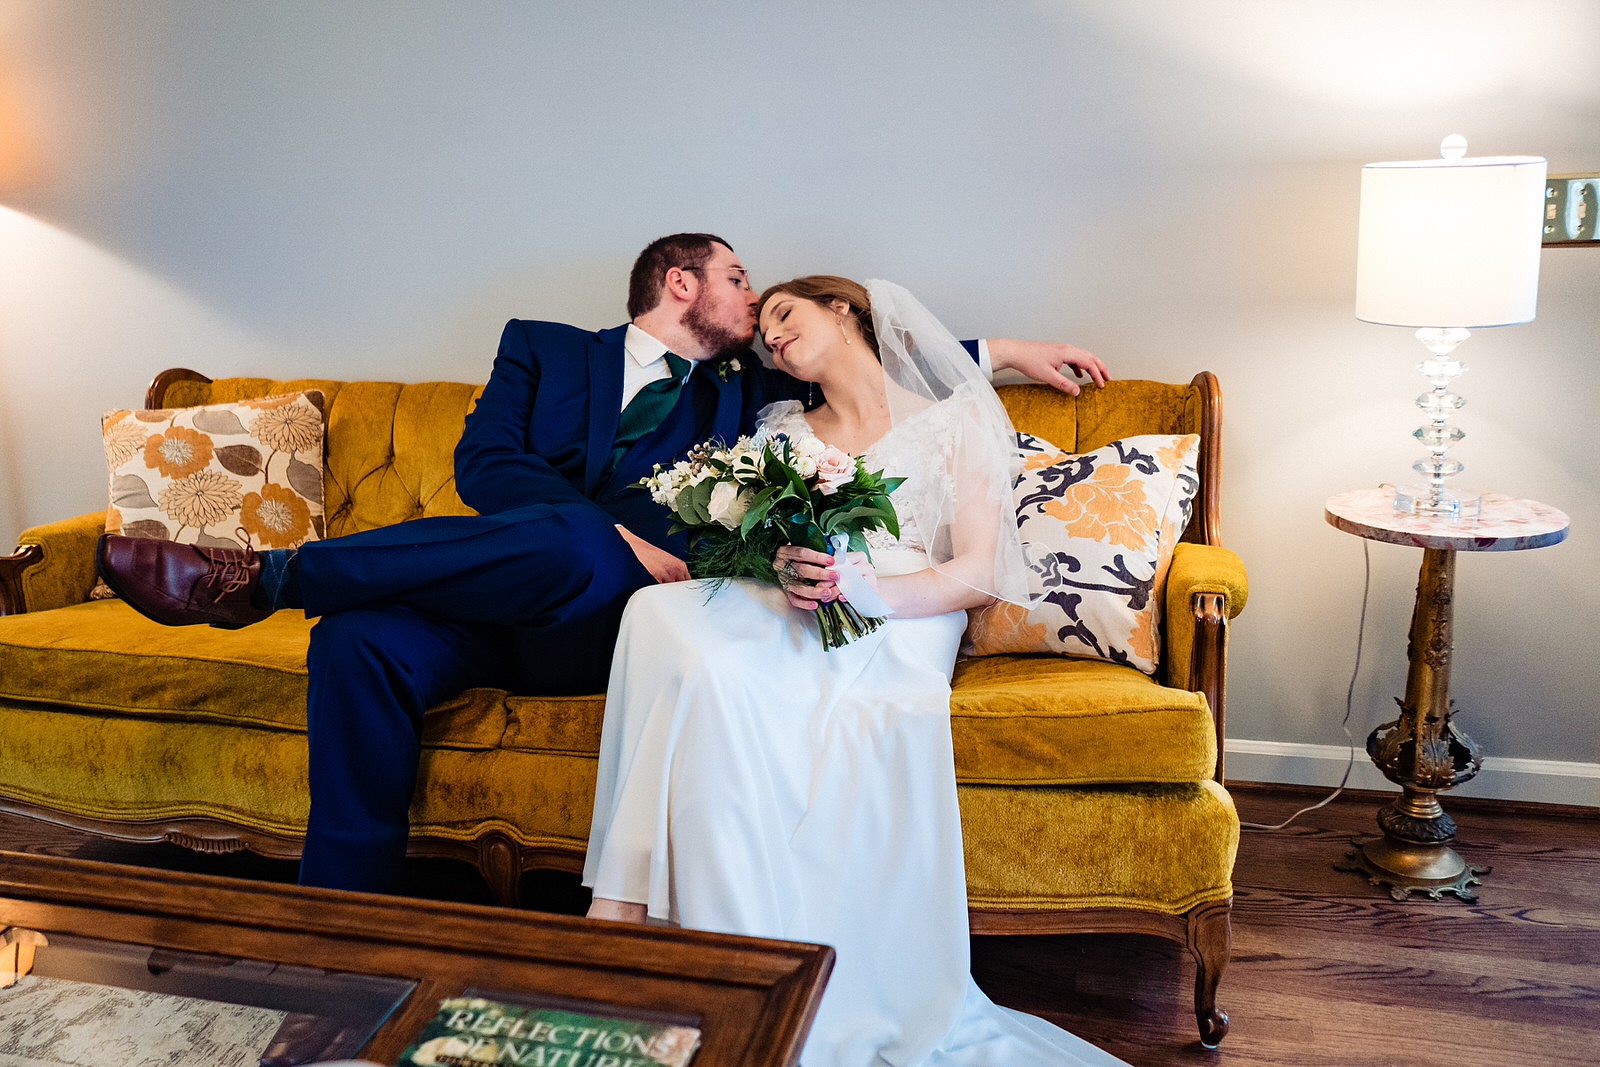 Bride & groom snuggle on a couch in the moments after their wedding ceremony at The Meadows Raleigh